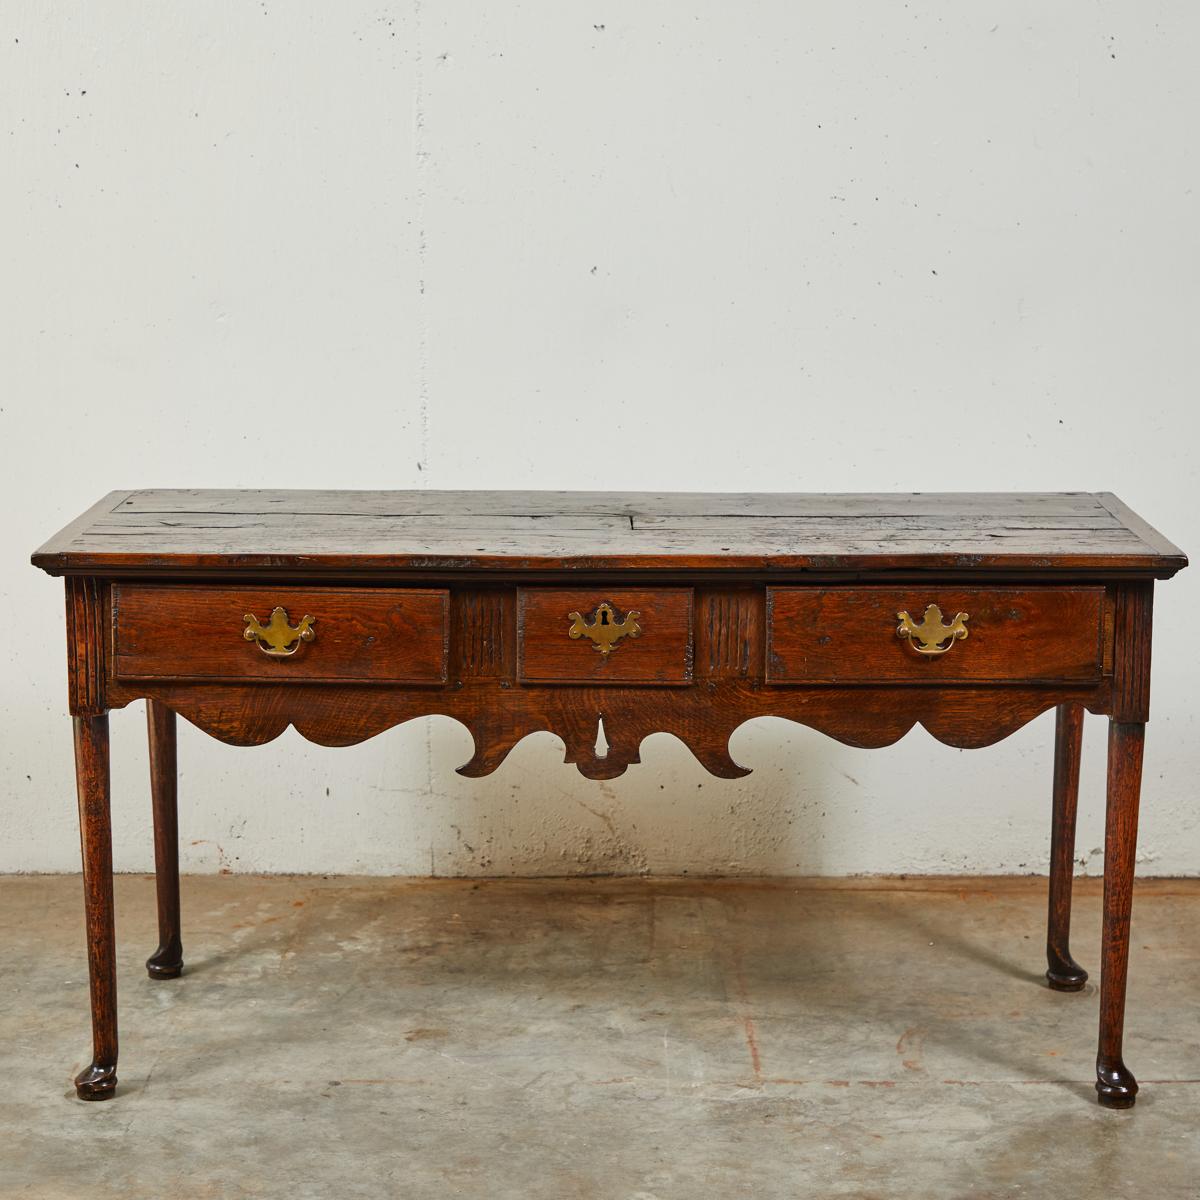 18th century English oak three-drawer dresser base or sofa table server with three frieze drawers and a carved apron raised on slender legs with pad feet. Great as a side table, occasional table, small credenza, or sideboard.